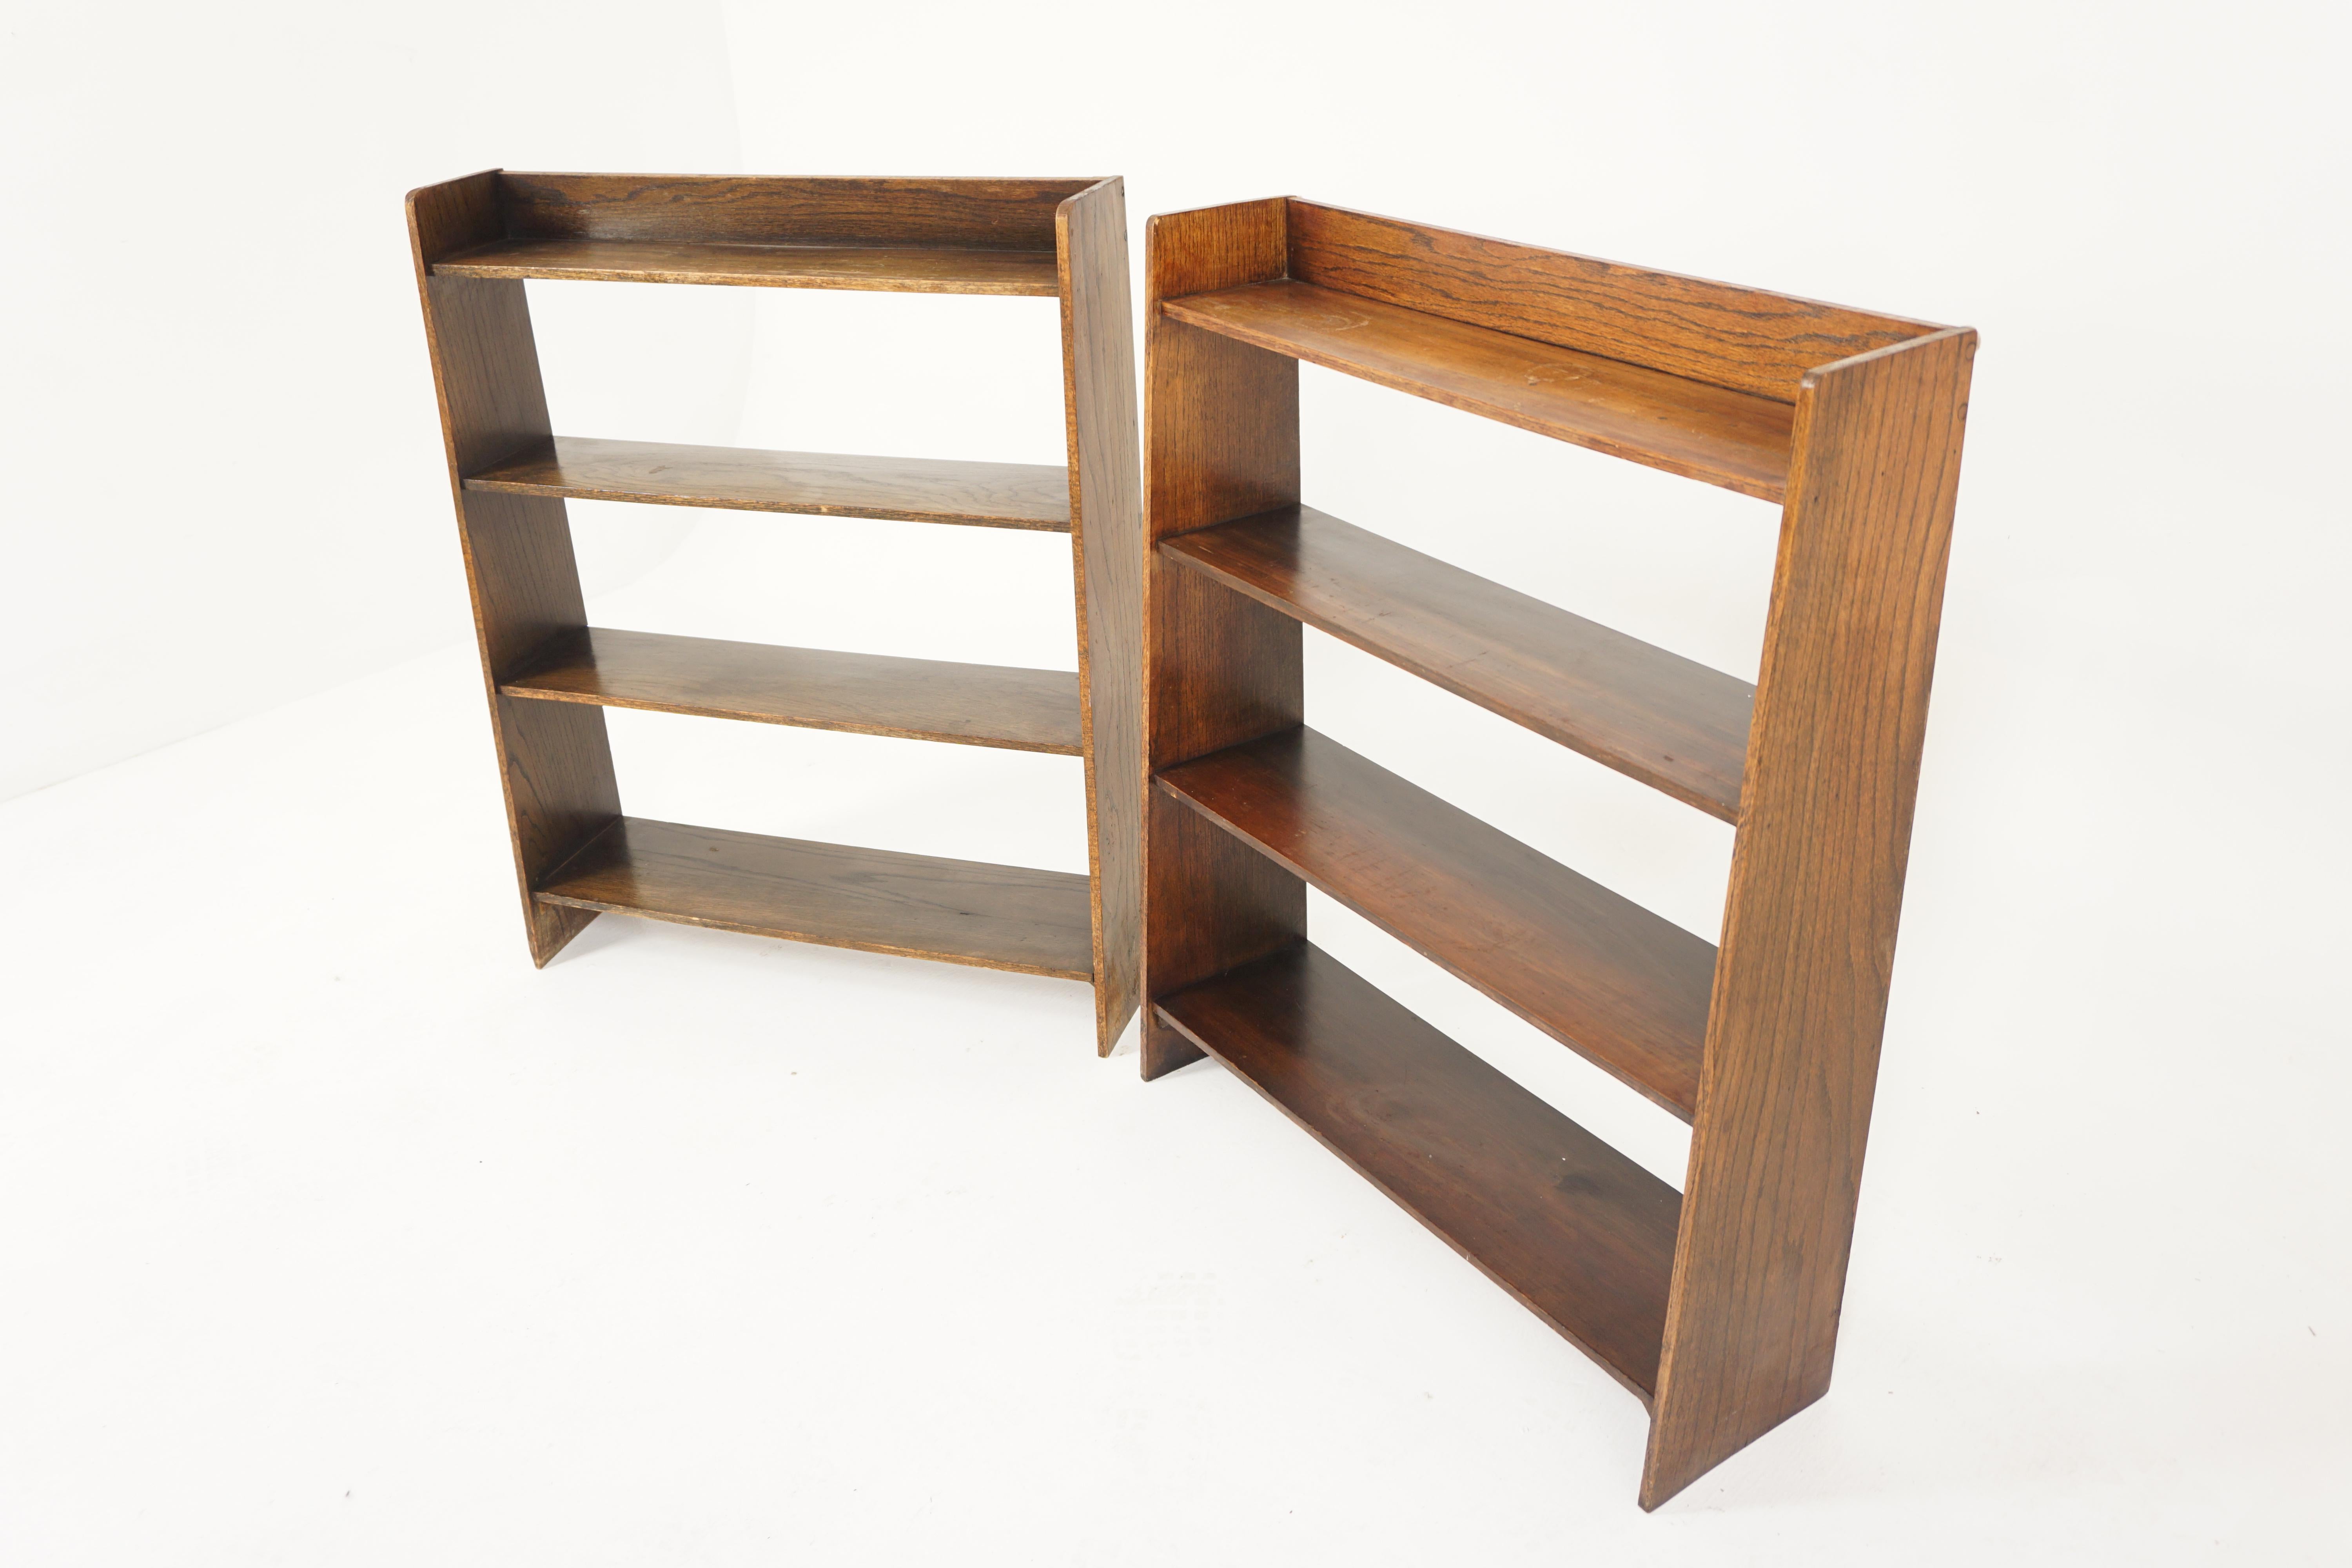 Pair of vintage oak open bookcases, display cabinets, Scotland 1930, B2900

Scotland 1930
Solid oak
Original finish
Galleried top
Three graduating shelves
Standing on plain legs to the floor
Some scuffs and scratches to both